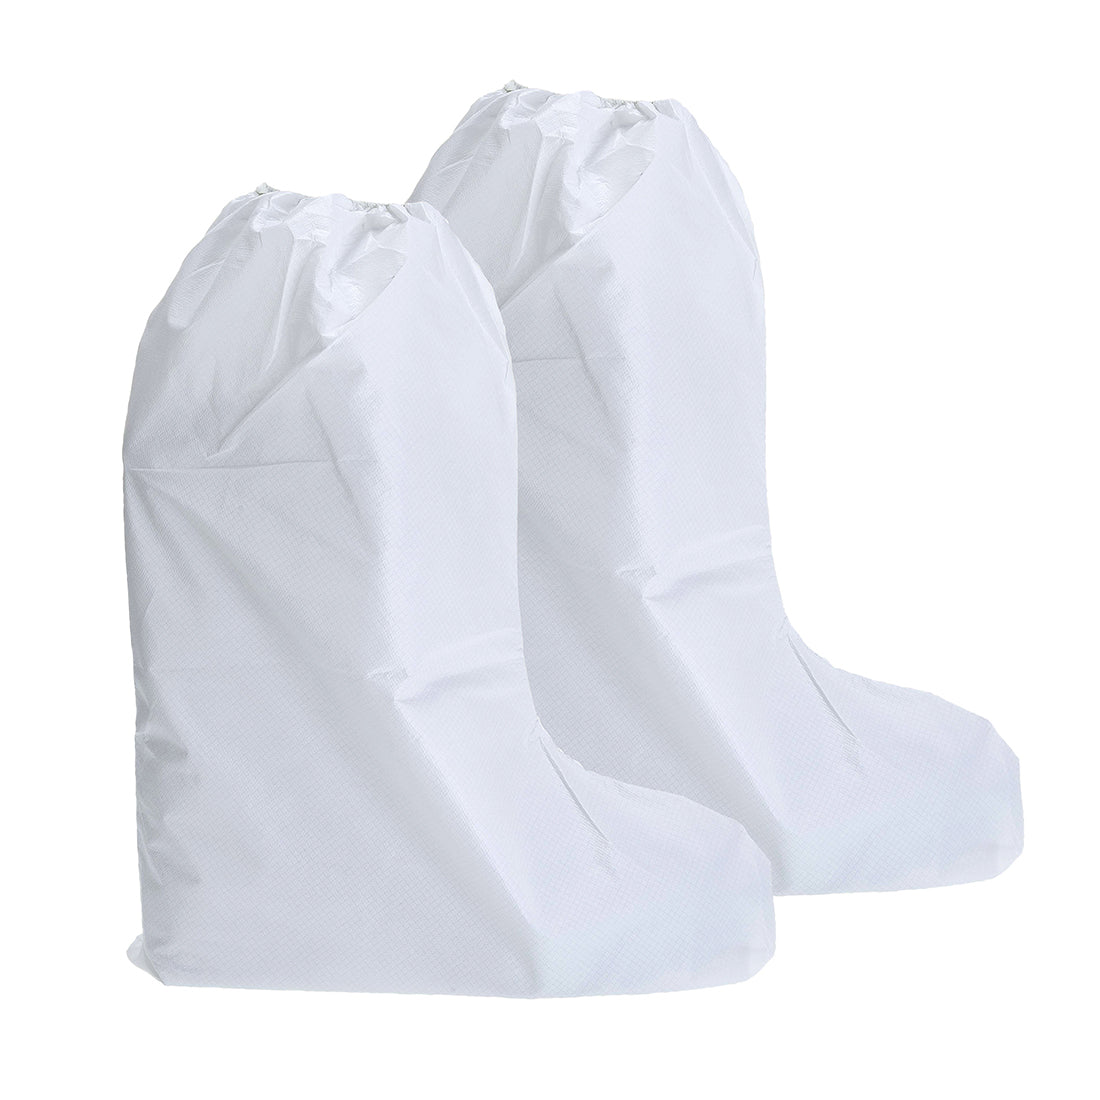 BizTex Microporous Boot Cover Type PB[6] (200 Pairs)  (ST45)